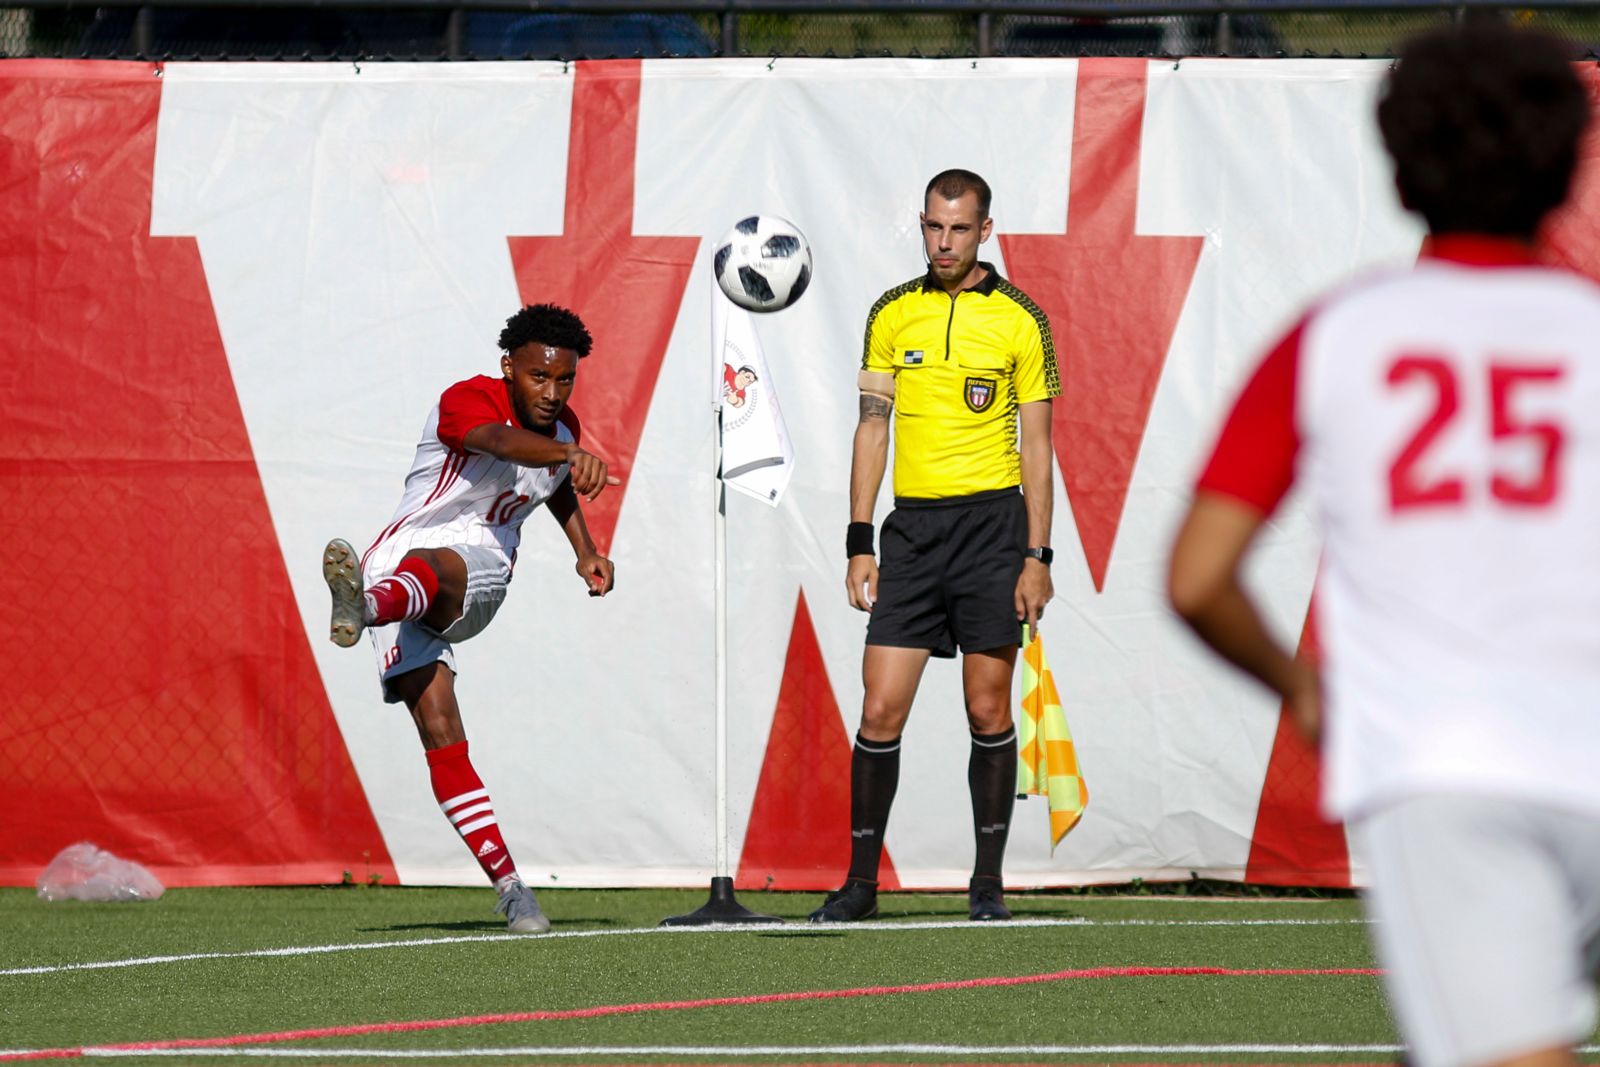 Wabash struck for the first goal against Franklin when Tim Herring fired a shot from the left side and scored to put the Little Giants up 1-0 during the season opener on Sept. 1, 2021.